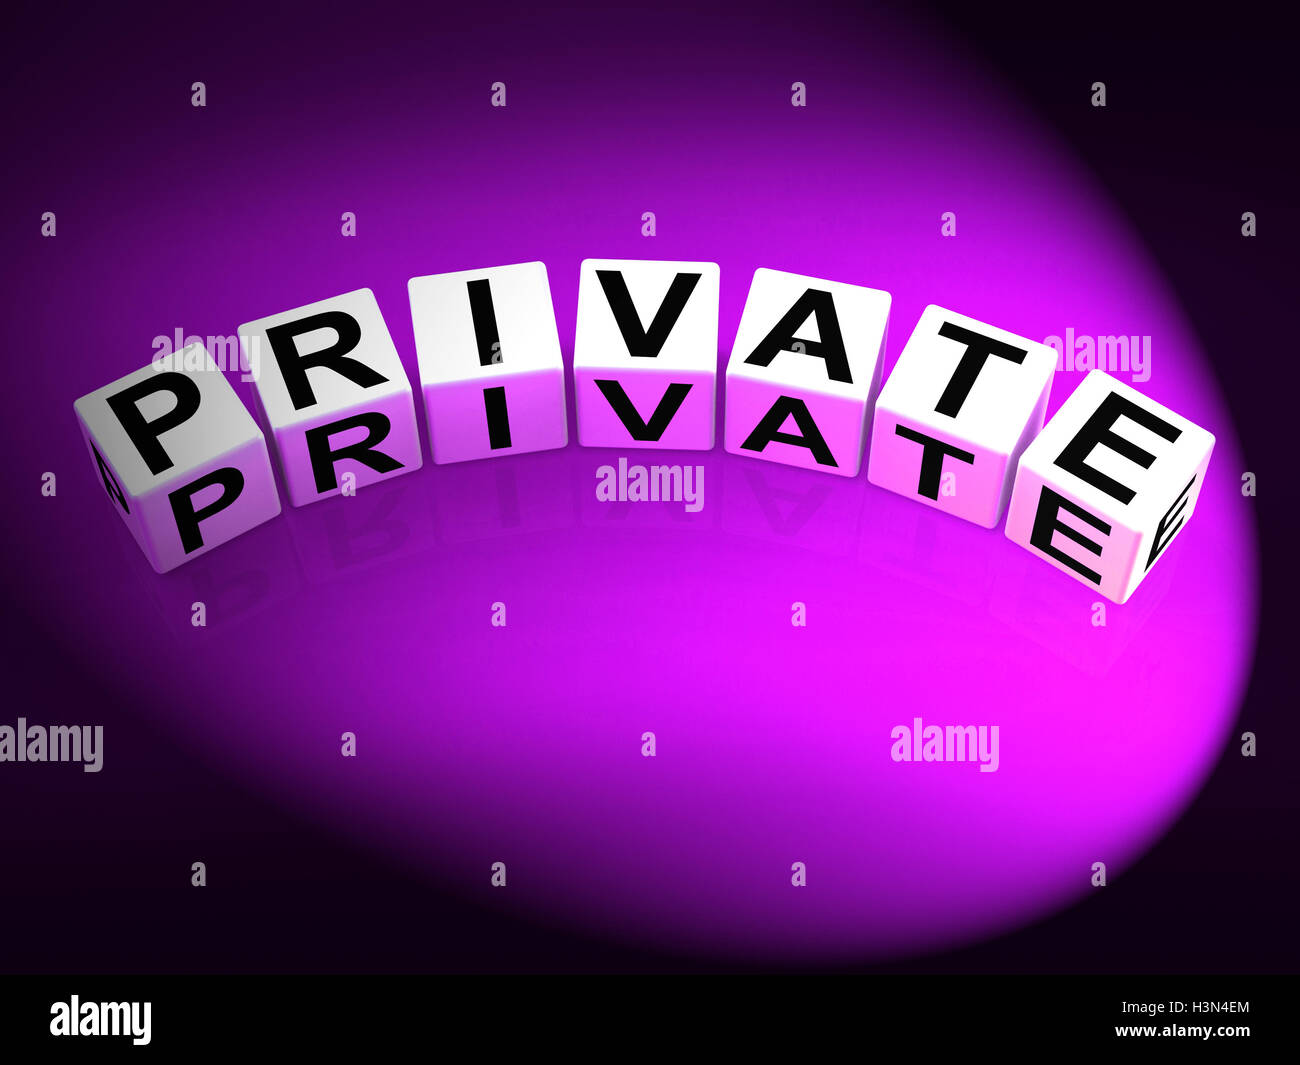 Private Dice Refer to Confidentiality Exclusively and Privacy Stock Photo